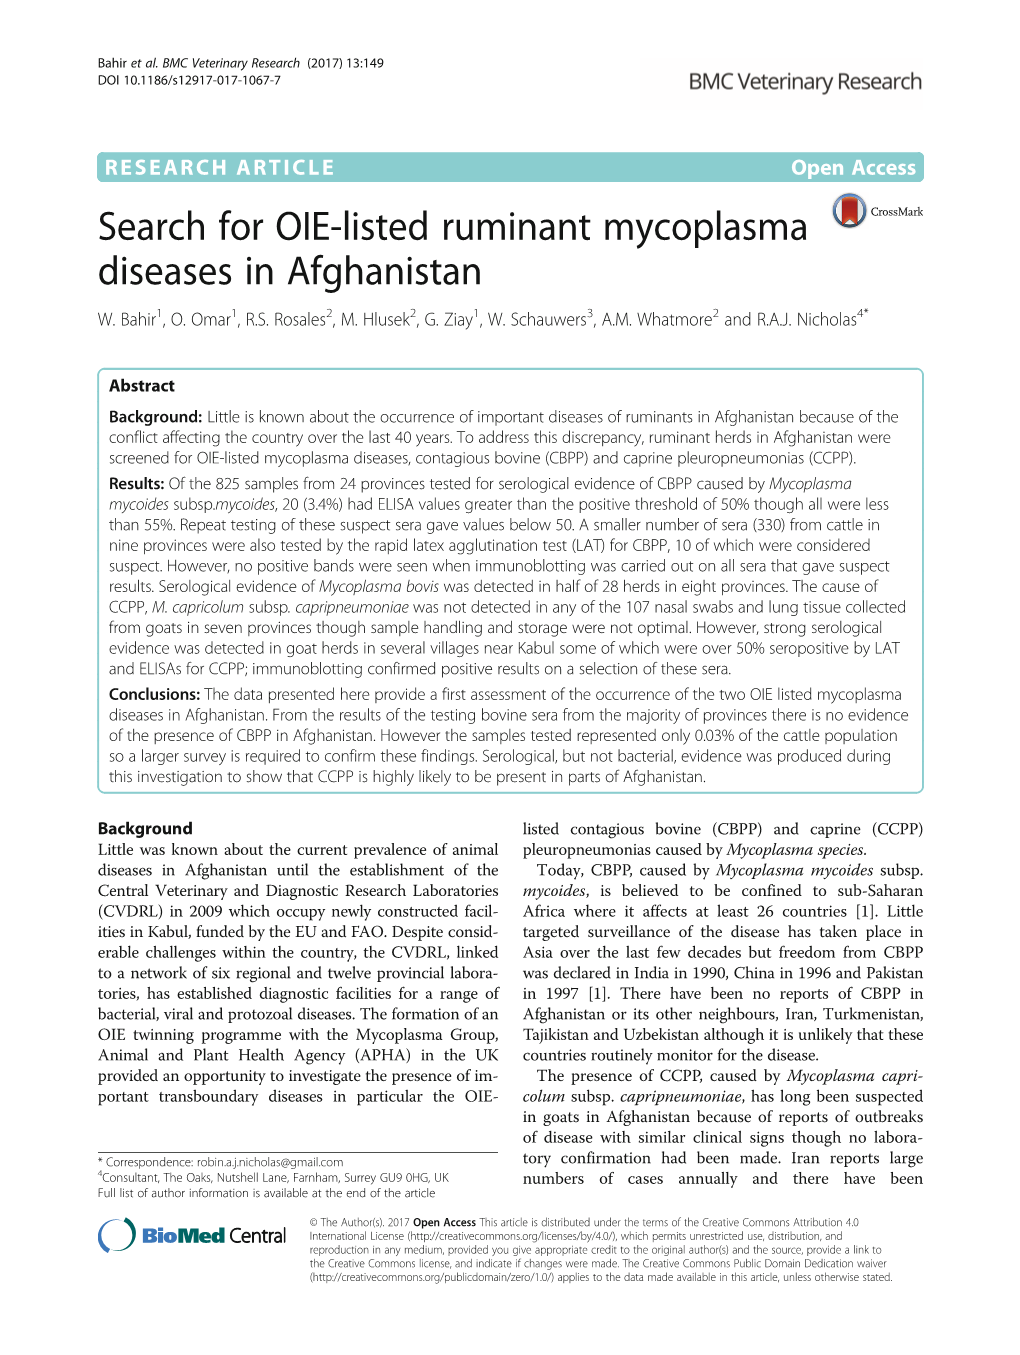 Search for OIE-Listed Ruminant Mycoplasma Diseases in Afghanistan W